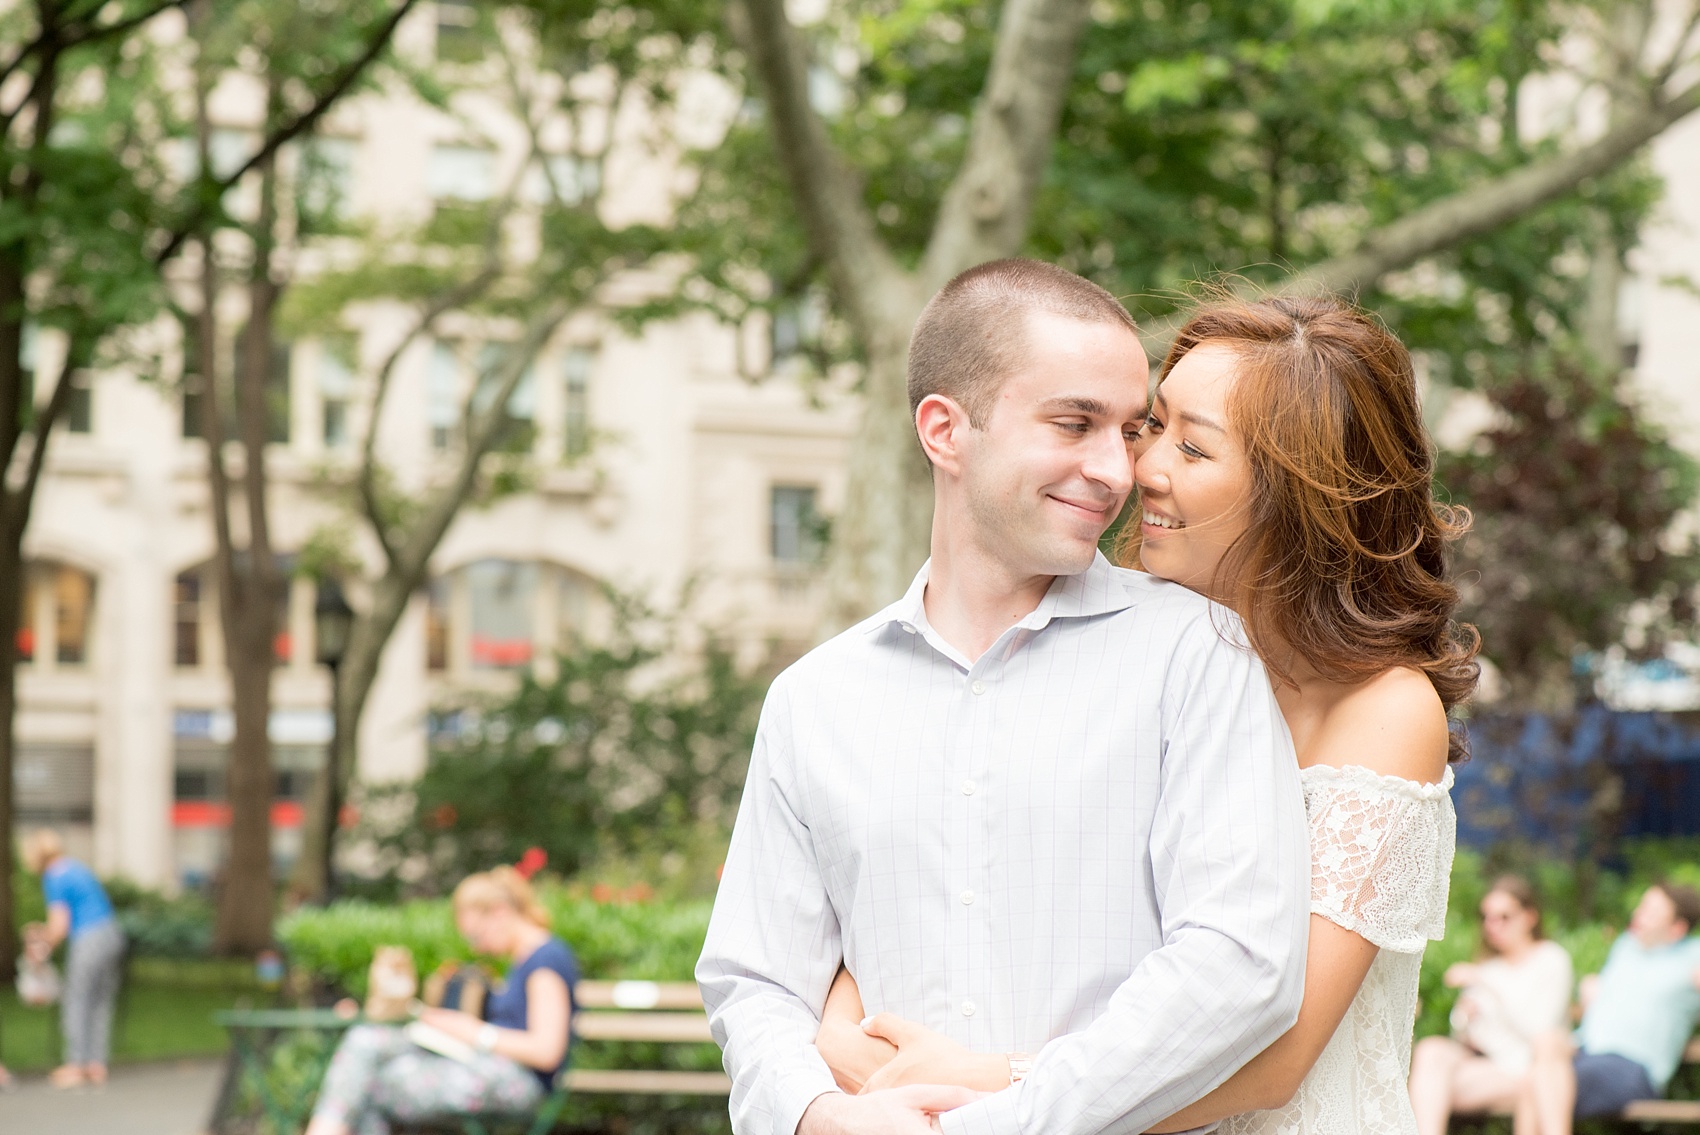 Mikkel Paige Photography photos of a Madison Square Park engagement session in NYC during spring. The bride wore an off-the-shoulder white lace top and orange shorts.